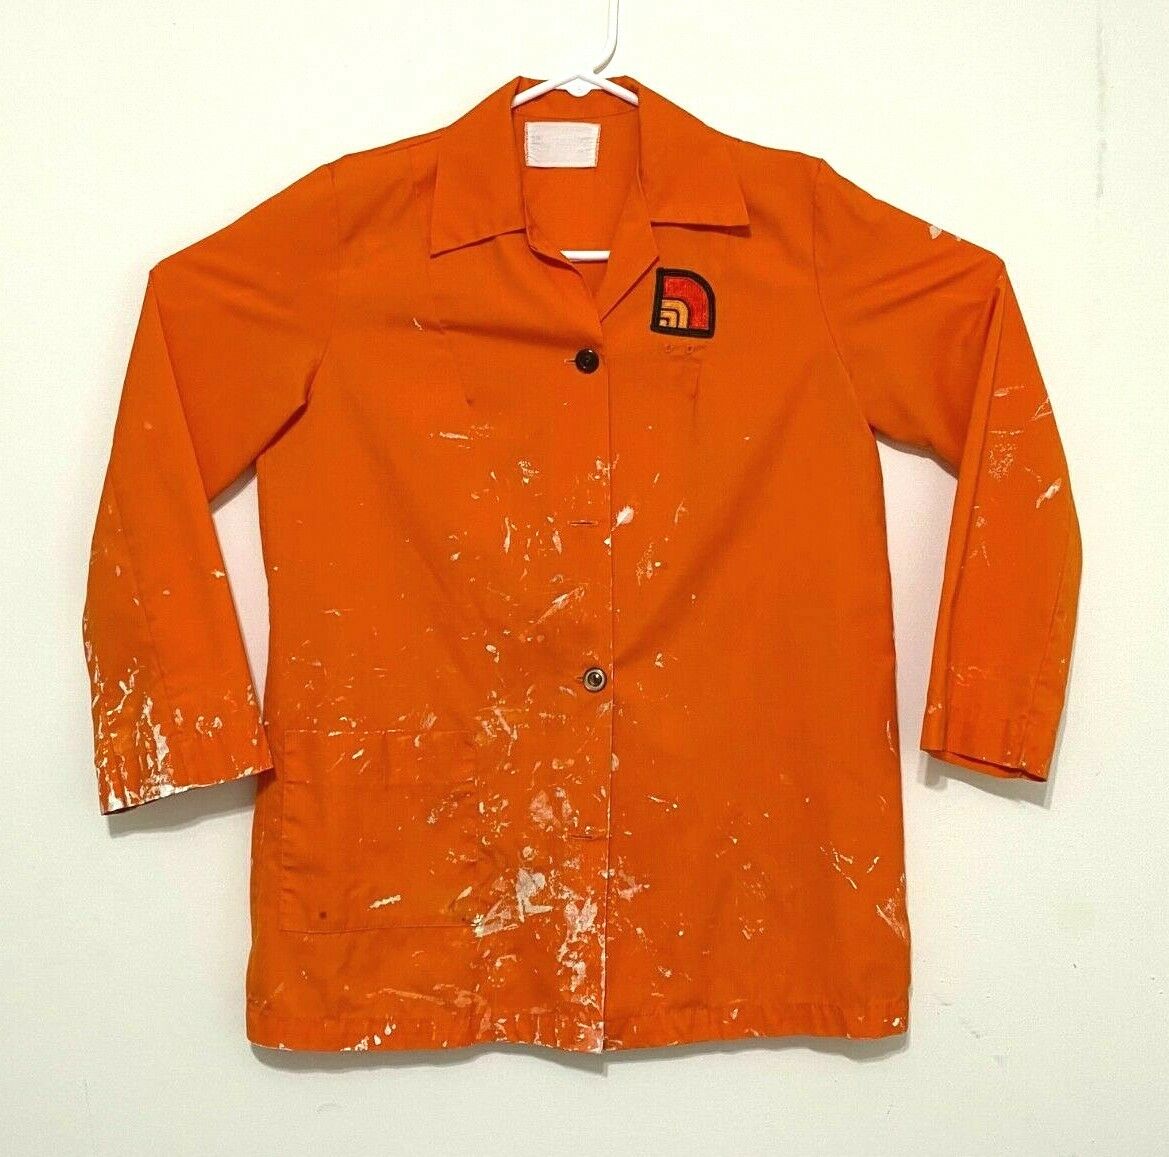 VTG National Supermarkets employee store shirt with patch & paint splatter